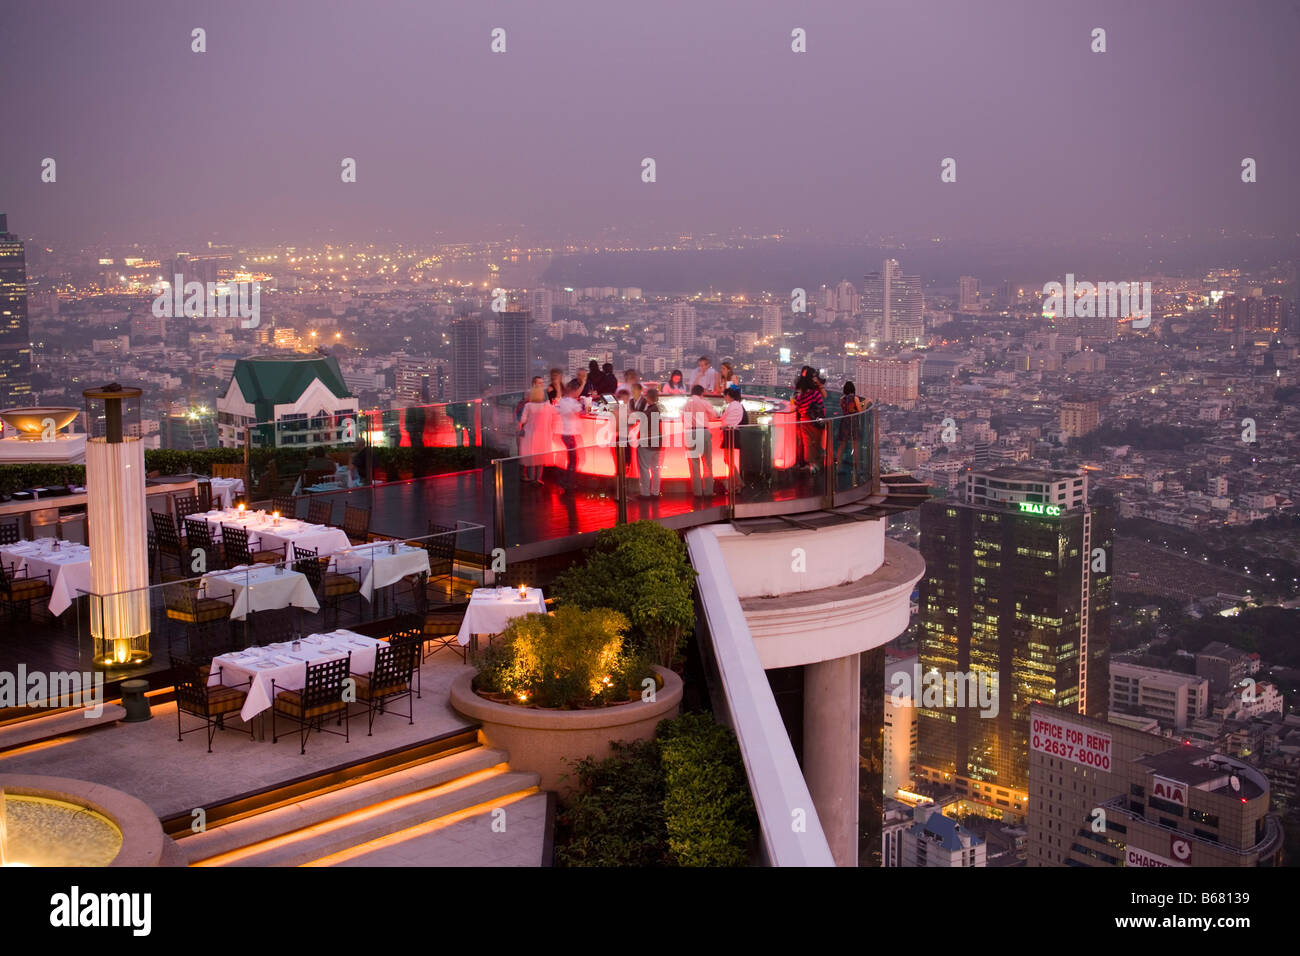 View over open air-bar Sirocco Sky Bar and Bangkok in the evening, State Tower, The Dome, Bangkok, Thailand Stock Photo